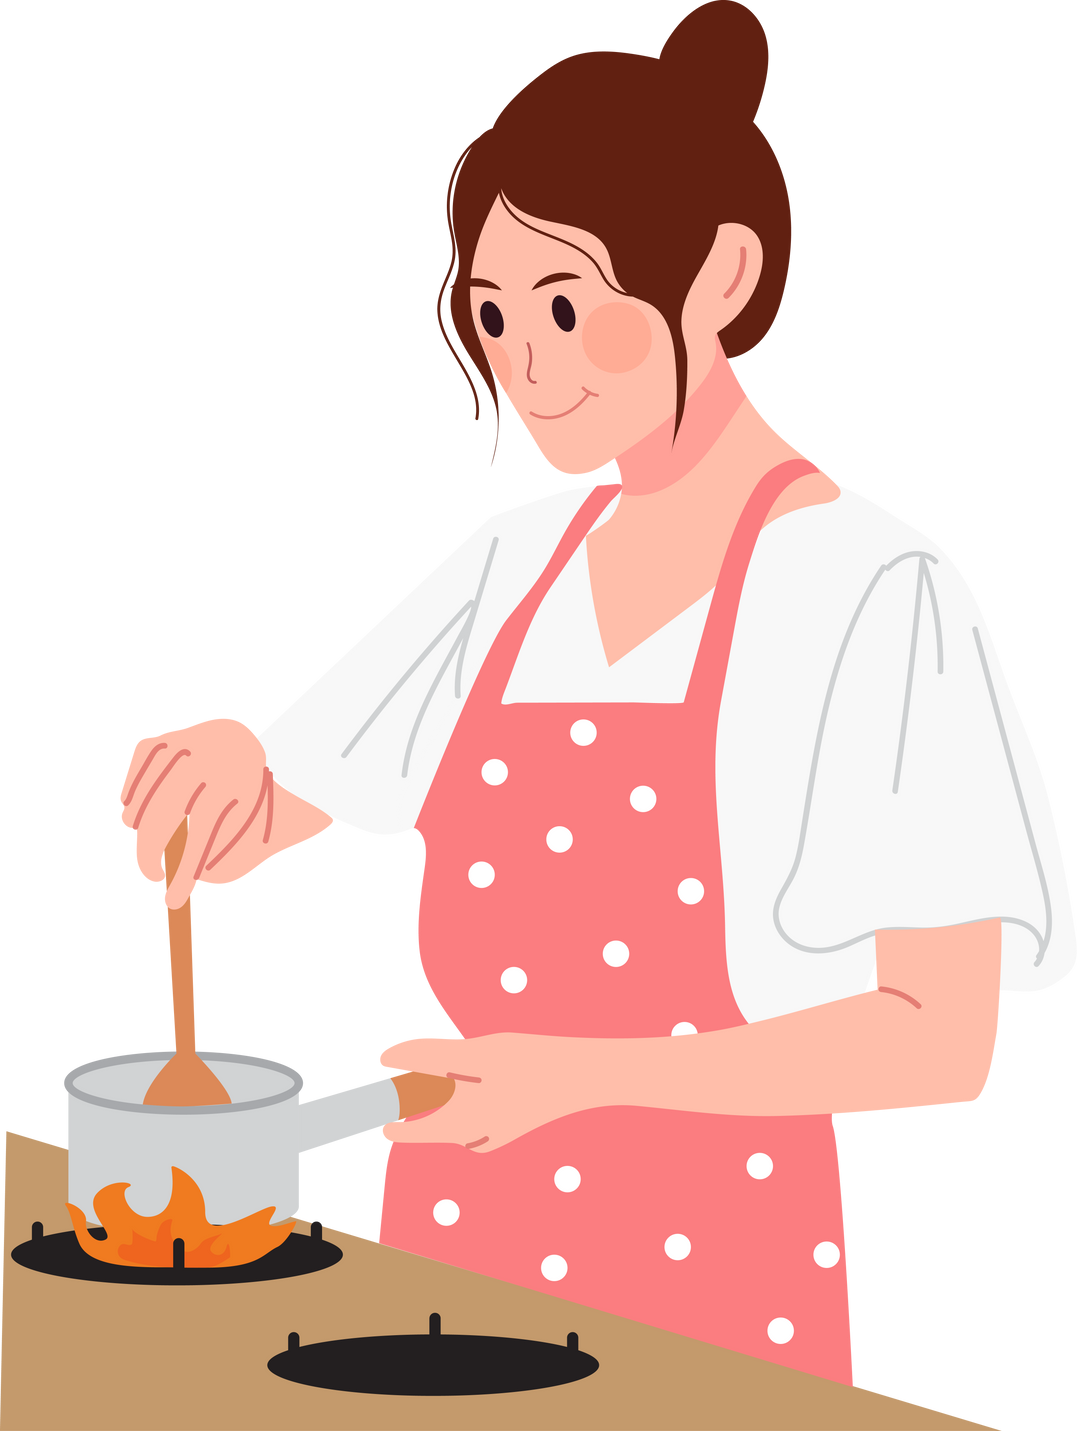 Cooking woman illustration.